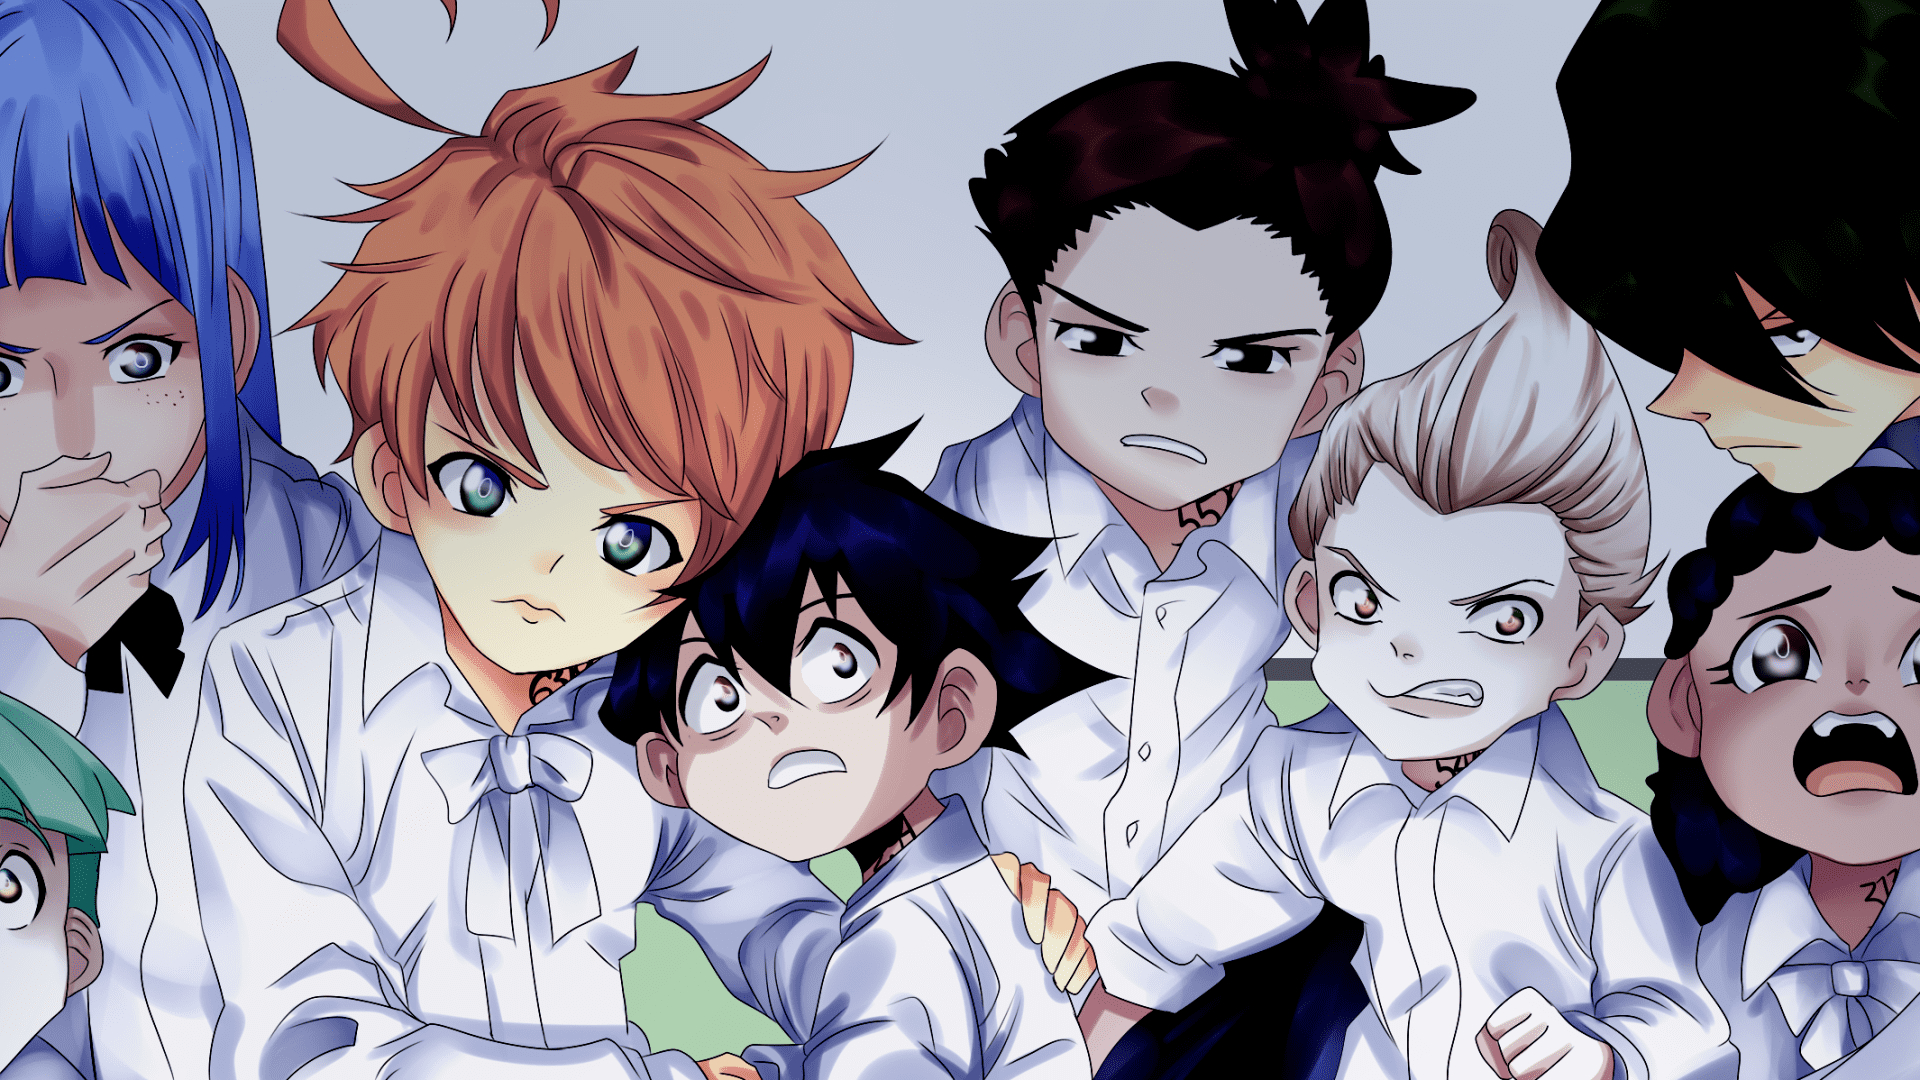 1920x1080 The Promised Neverland Wallpapers Top 65 Best The Promised Neverland Backgrounds